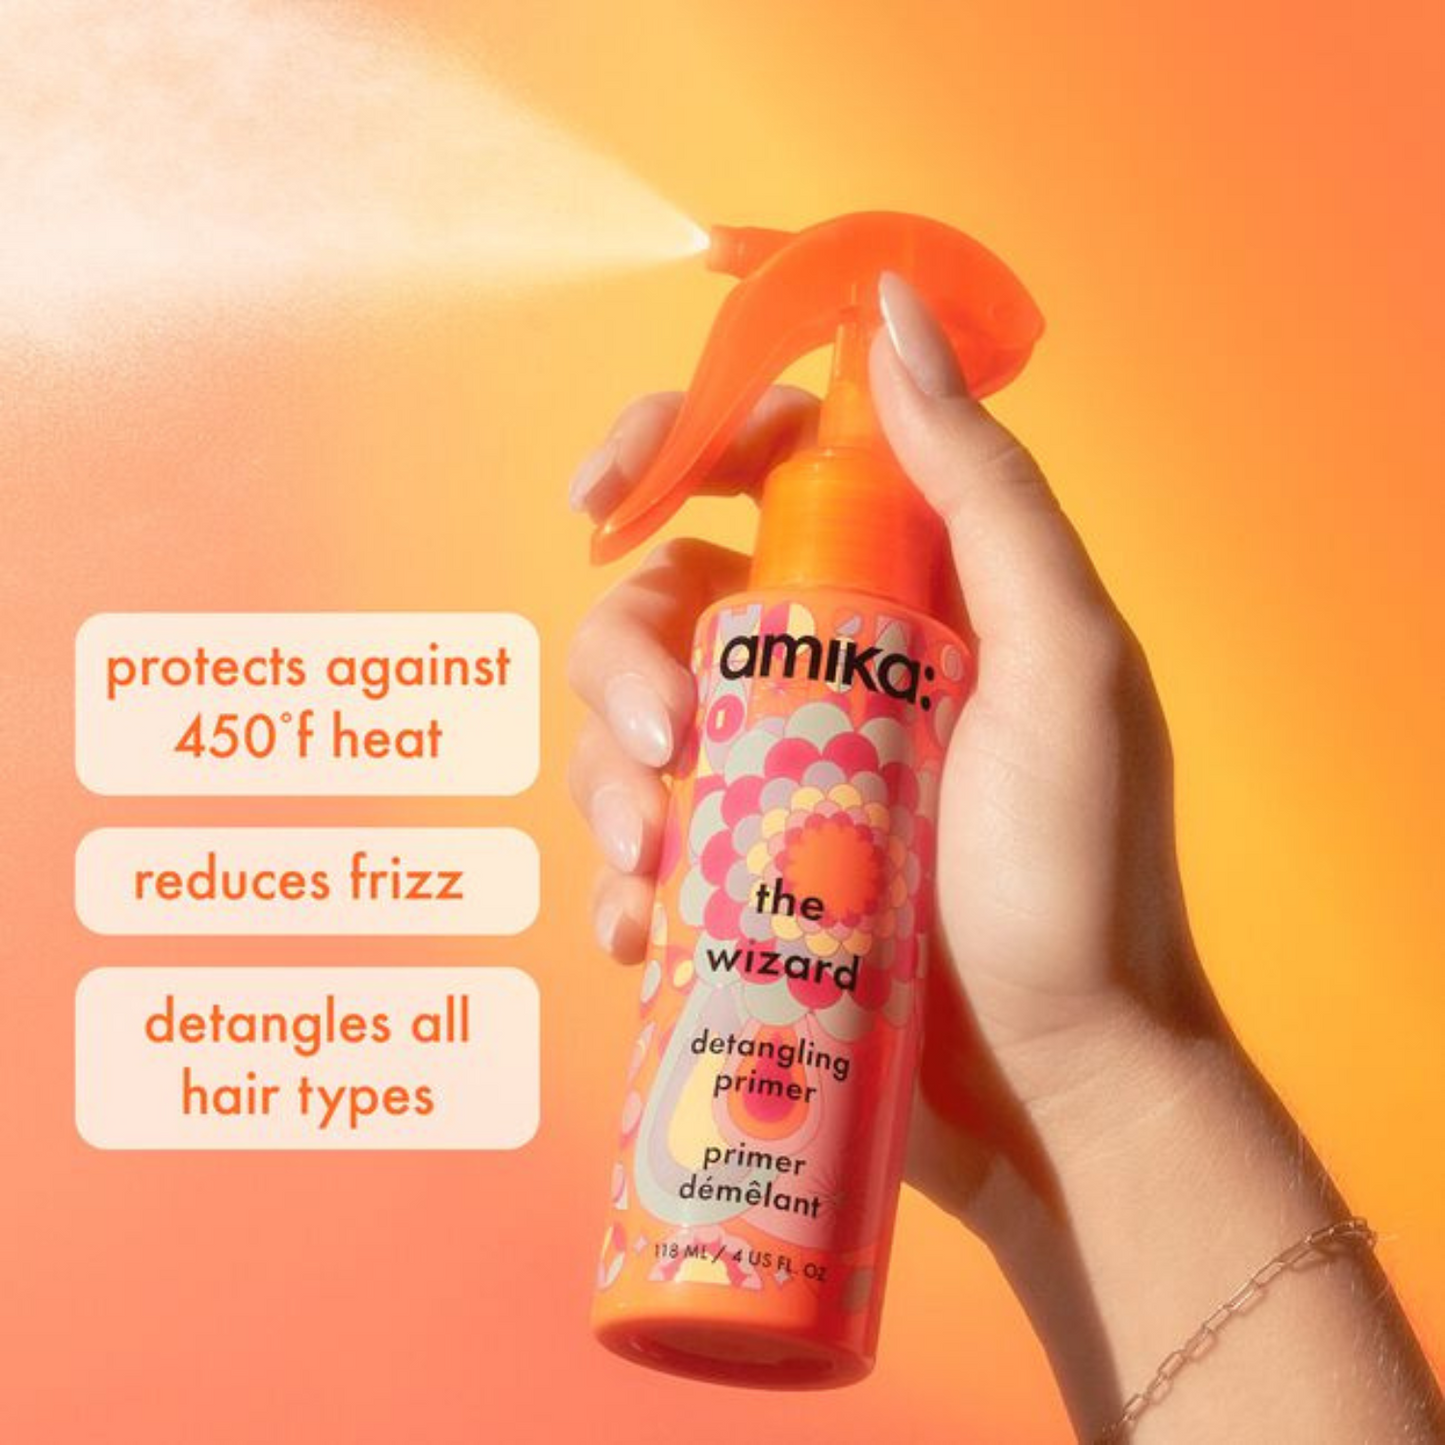 Evenly mist throughout damp hair before detangling and/or blow drying. Or... Mist throughout damp hair then style as usual. Options are endless!